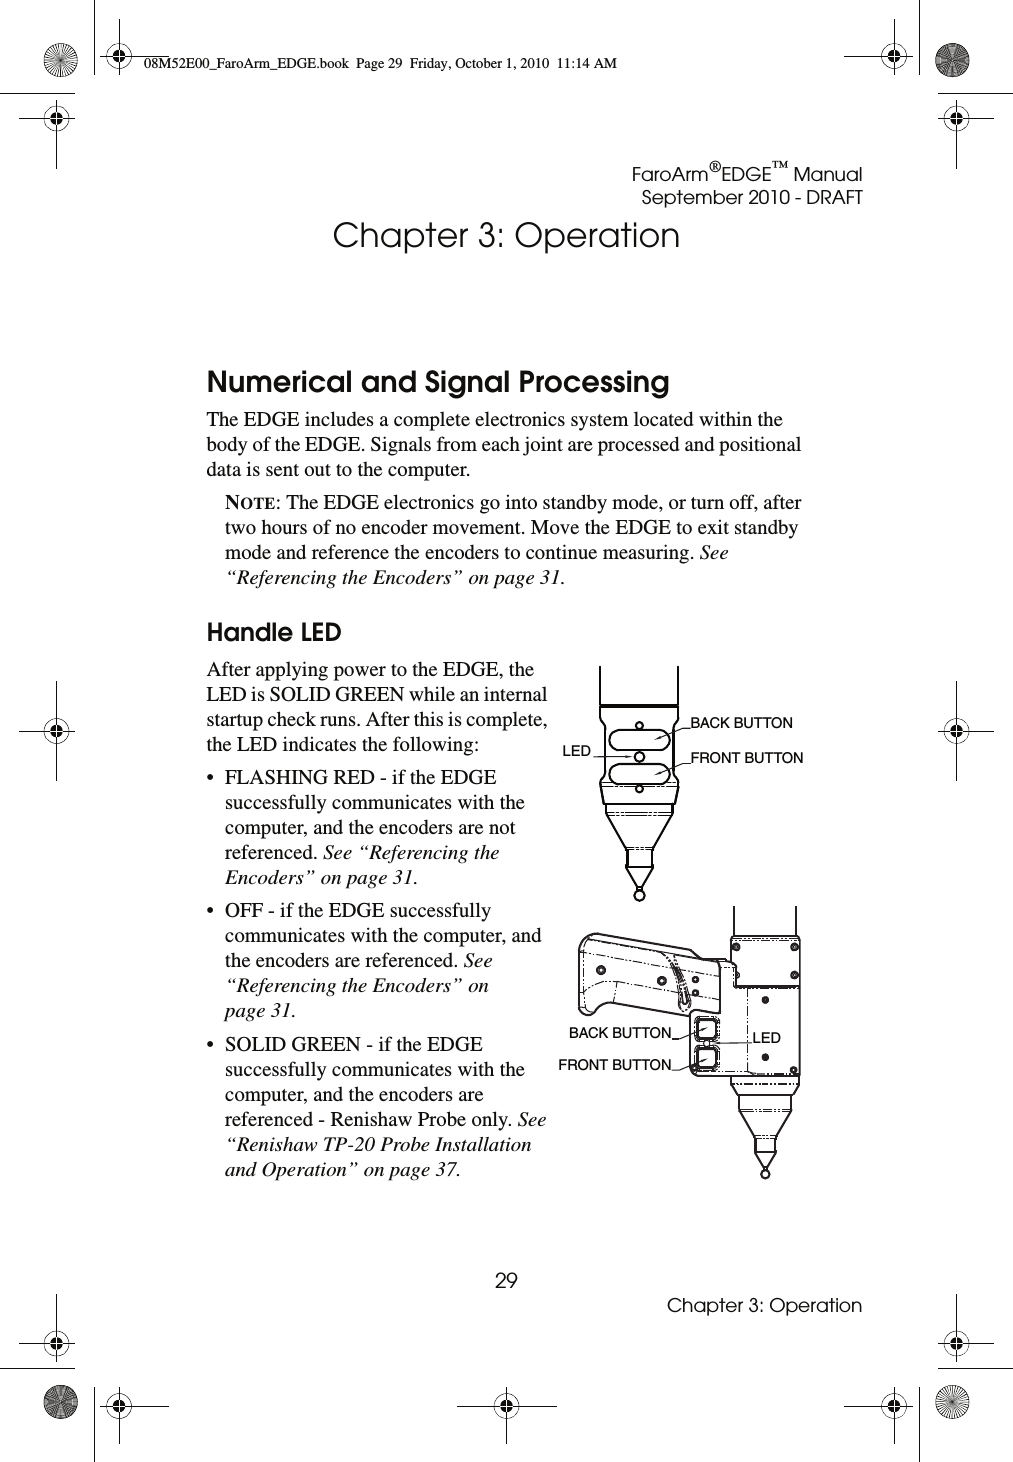 FaroArm®EDGE™ ManualSeptember 2010 - DRAFT29Chapter 3: OperationChapter 3: OperationNumerical and Signal ProcessingThe EDGE includes a complete electronics system located within the body of the EDGE. Signals from each joint are processed and positional data is sent out to the computer.NOTE: The EDGE electronics go into standby mode, or turn off, after two hours of no encoder movement. Move the EDGE to exit standby mode and reference the encoders to continue measuring. See “Referencing the Encoders” on page 31. Handle LEDAfter applying power to the EDGE, the LED is SOLID GREEN while an internal startup check runs. After this is complete, the LED indicates the following:• FLASHING RED - if the EDGE successfully communicates with the computer, and the encoders are not referenced. See “Referencing the Encoders” on page 31.• OFF - if the EDGE successfully communicates with the computer, and the encoders are referenced. See “Referencing the Encoders” on page 31.• SOLID GREEN - if the EDGE successfully communicates with the computer, and the encoders are referenced - Renishaw Probe only. See “Renishaw TP-20 Probe Installation and Operation” on page 37.LED BACK BUTTON FRONT BUTTON BACK BUTTONFRONT BUTTONLED08M52E00_FaroArm_EDGE.book  Page 29  Friday, October 1, 2010  11:14 AM